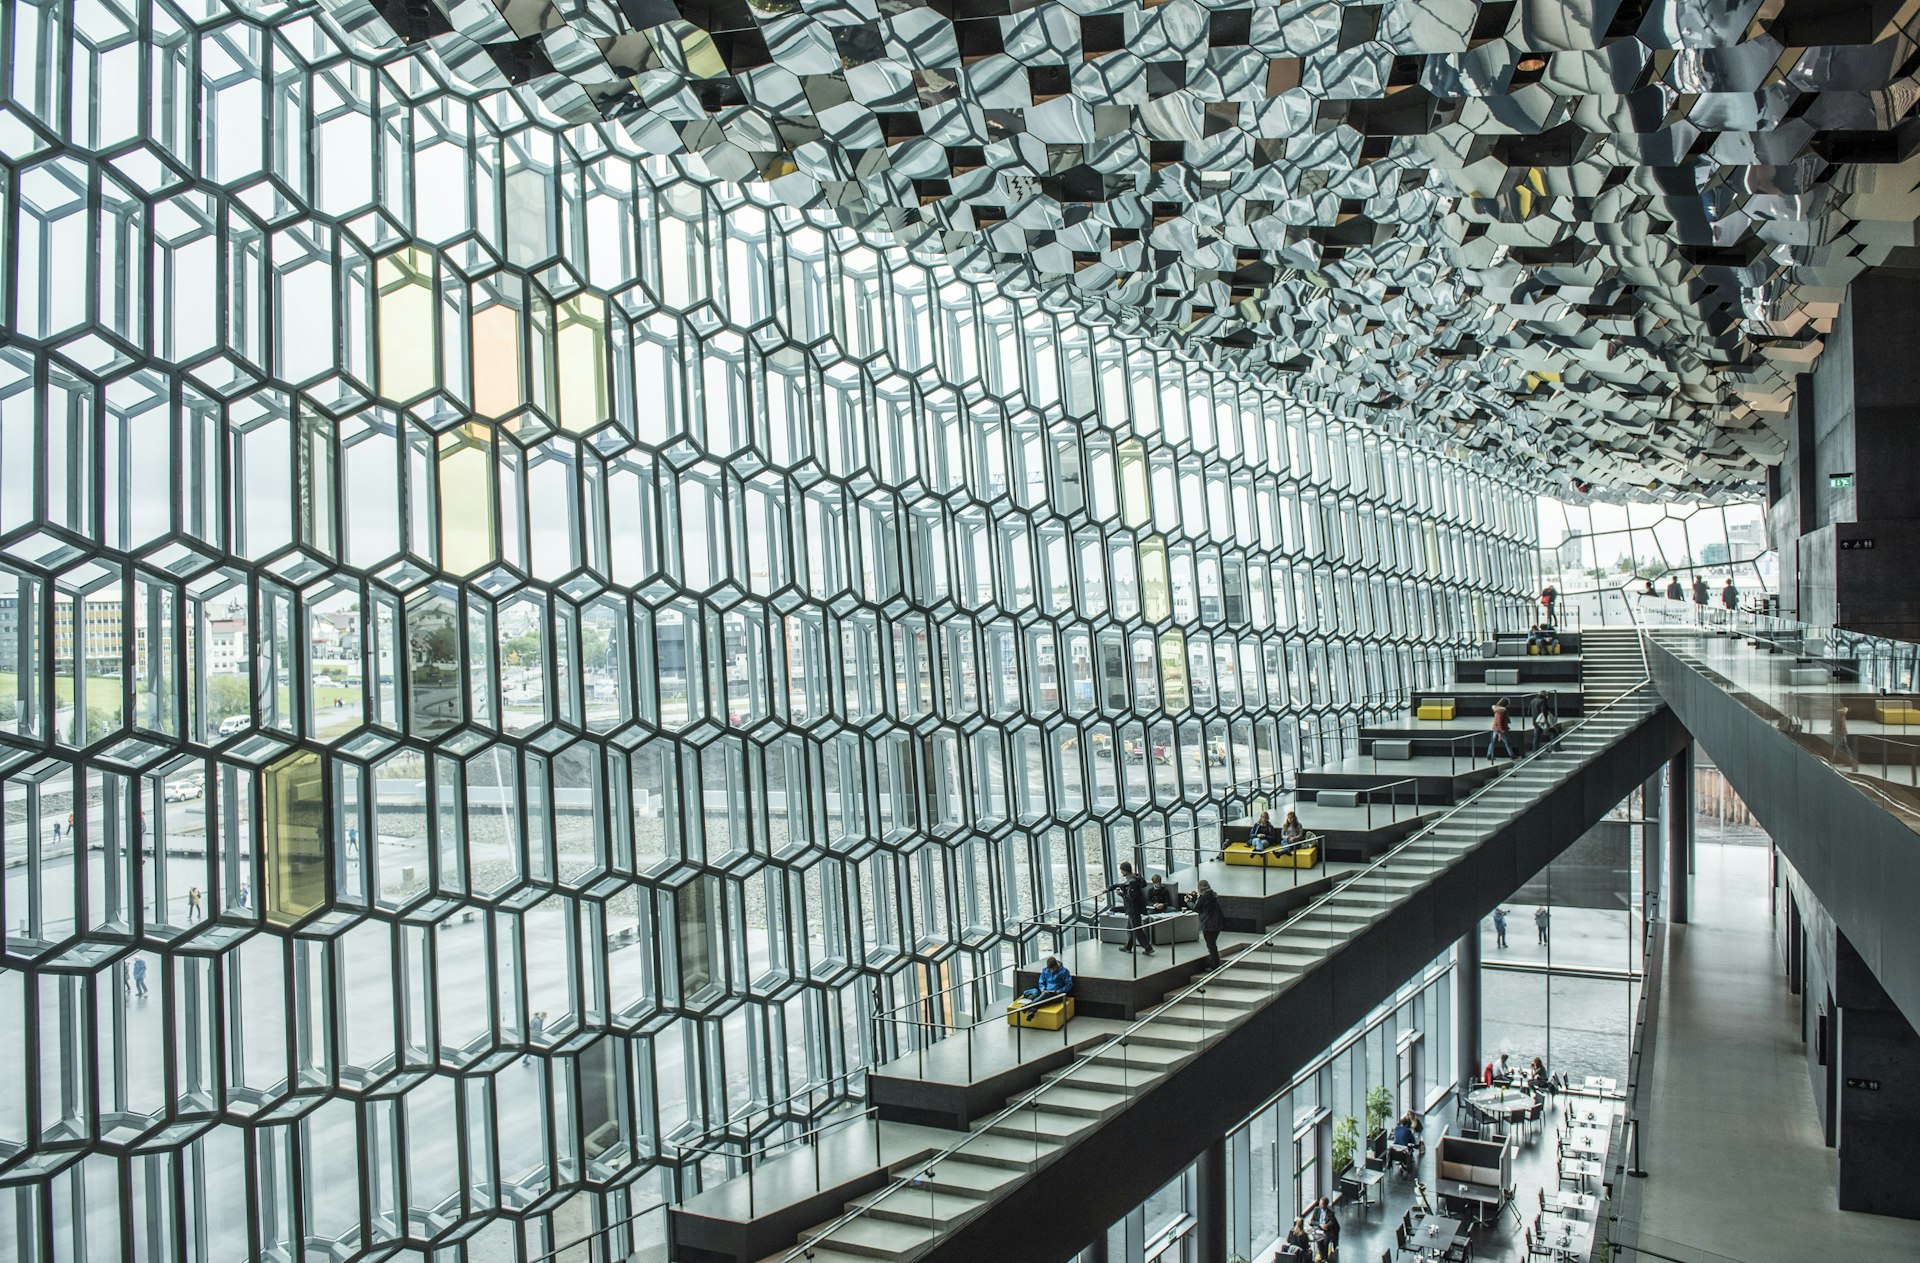 Interior views of Harpa, Iceland's beautiful concert hall and cultural center, designed by Henning Larsen architects and artist Olafur Eliasson 